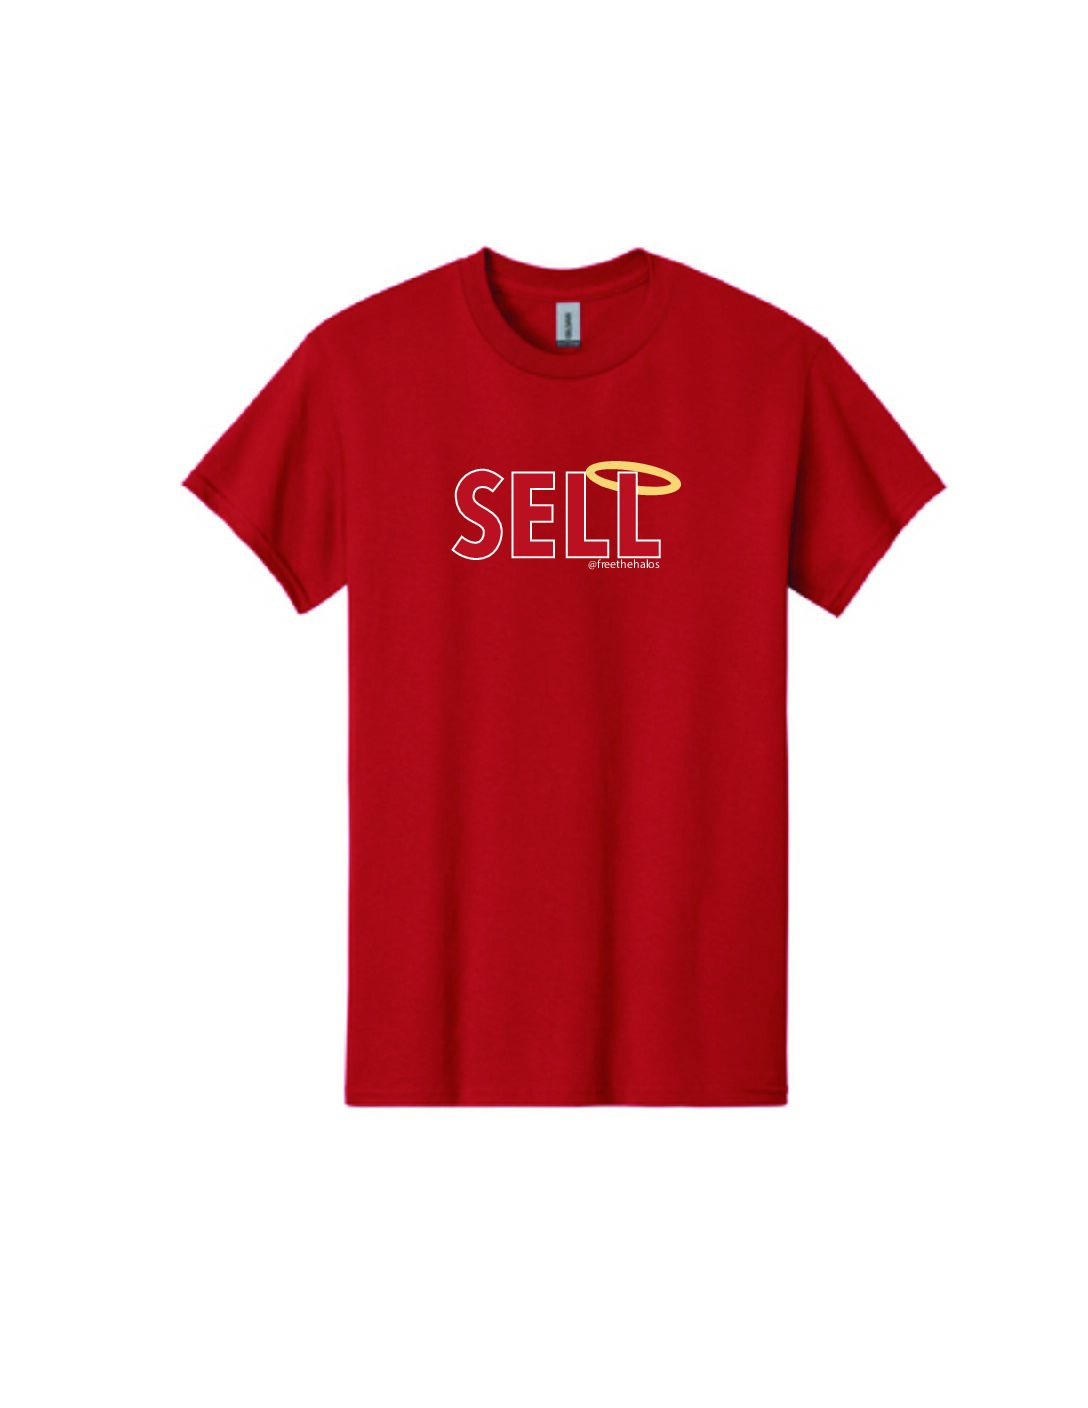 "Sell" Tee - Red